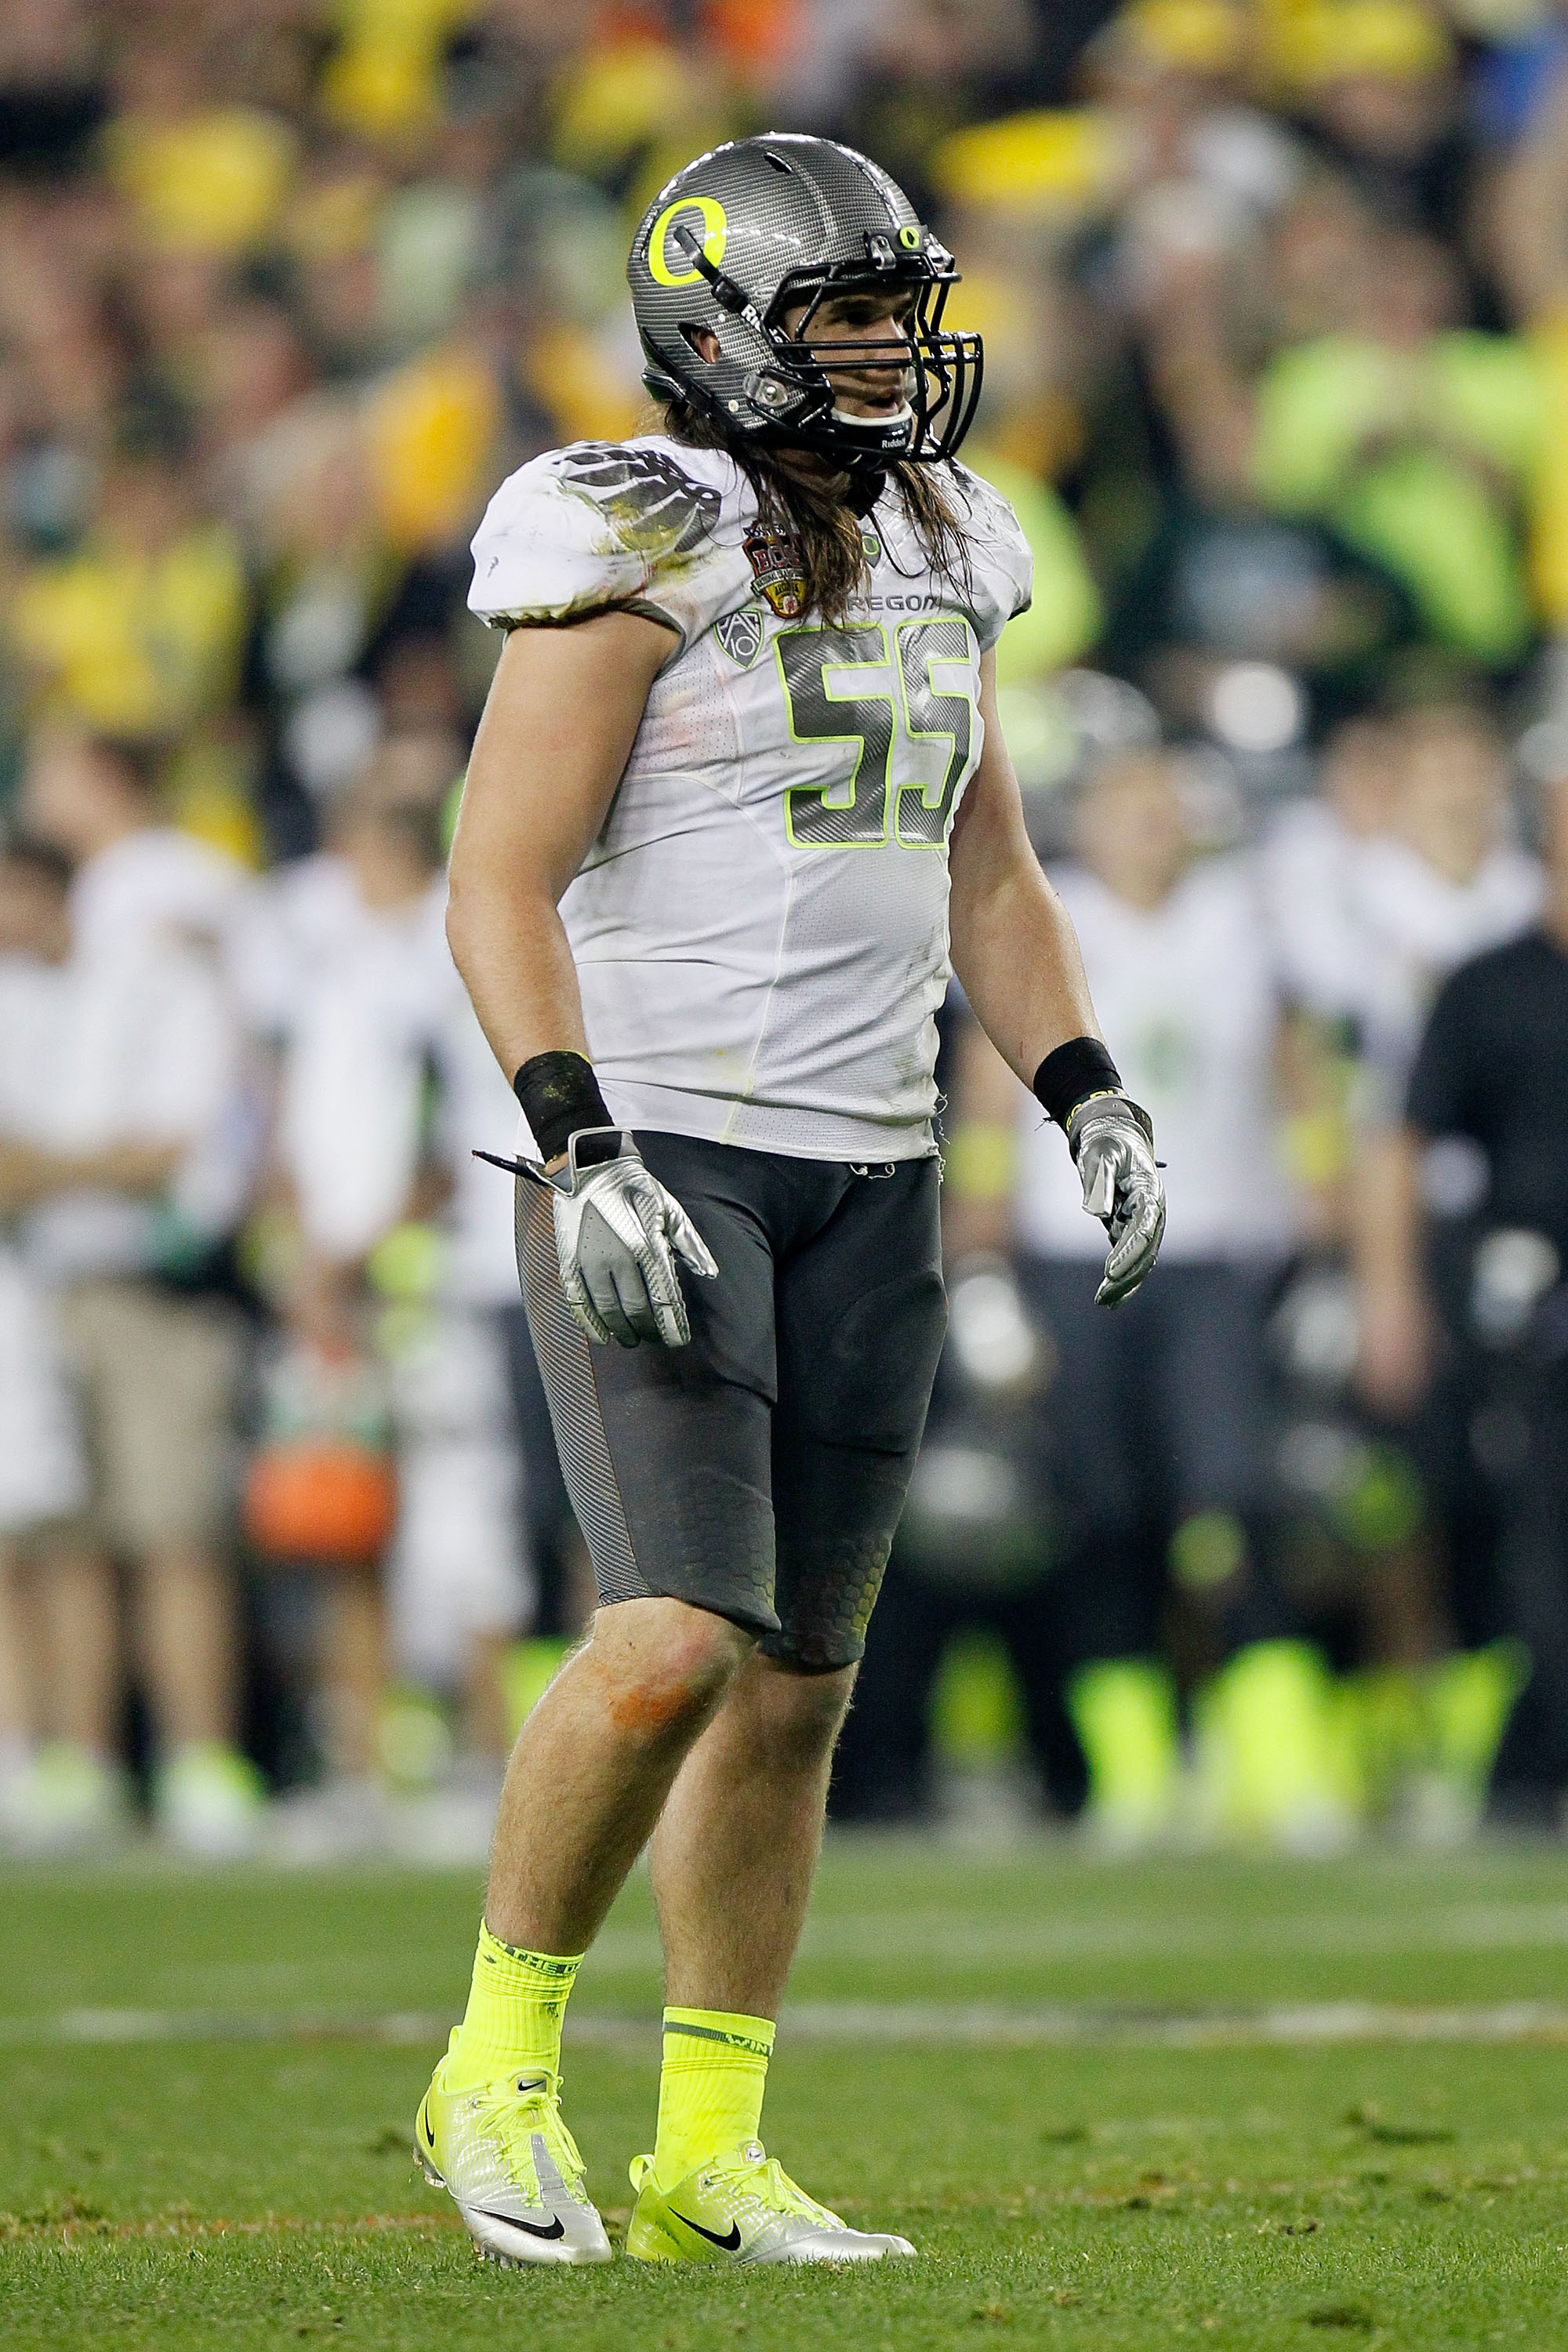 GLENDALE, AZ - JANUARY 10:  Casey Matthews #55 of the Oregon Ducks looks on against the Auburn Tigers during the Tostitos BCS National Championship Game at University of Phoenix Stadium on January 10, 2011 in Glendale, Arizona.  (Photo by Kevin C. Cox/Get